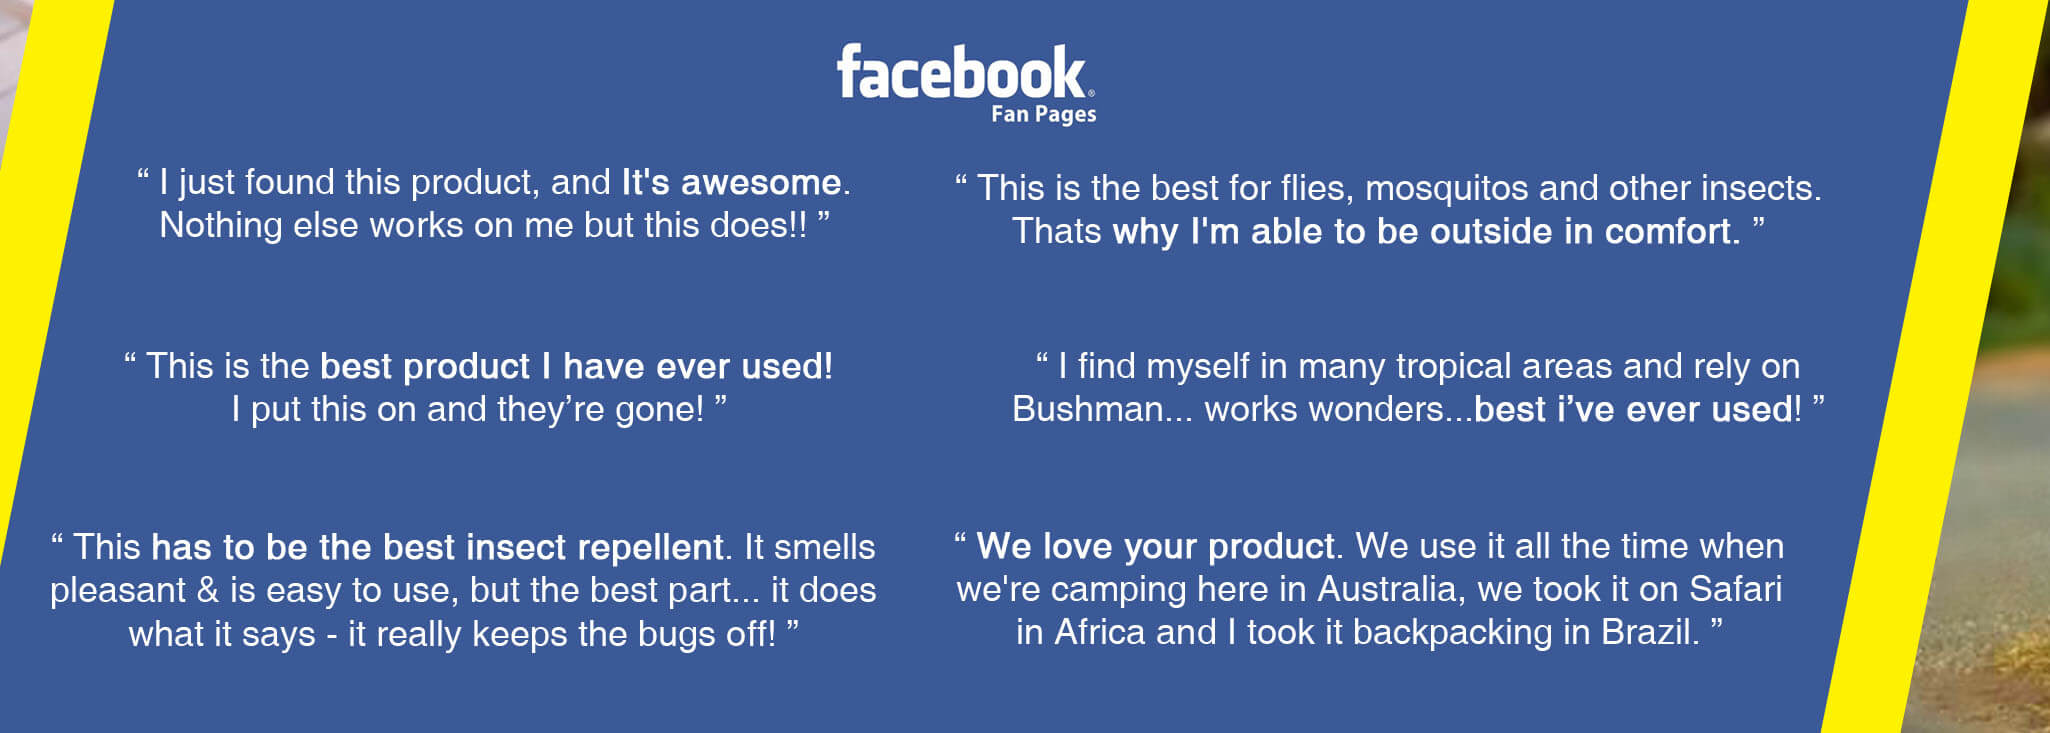 Facebook: It is awesome. Best insect repellent - review